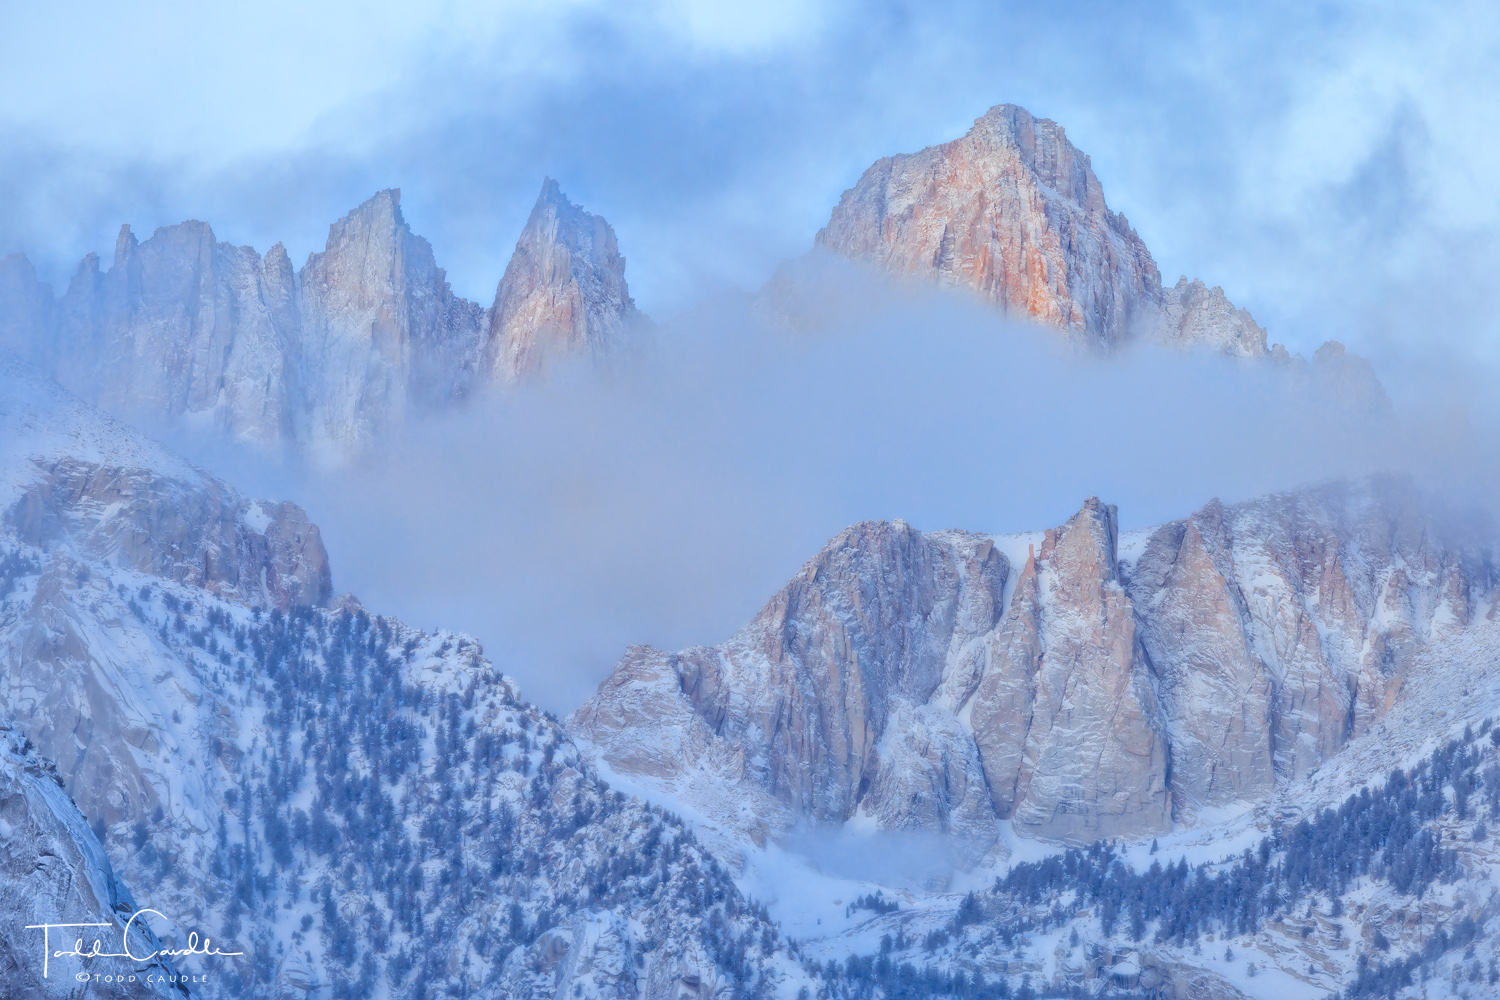 Predawn colors from the east paint the Mount Whitney massif in pastel shades.